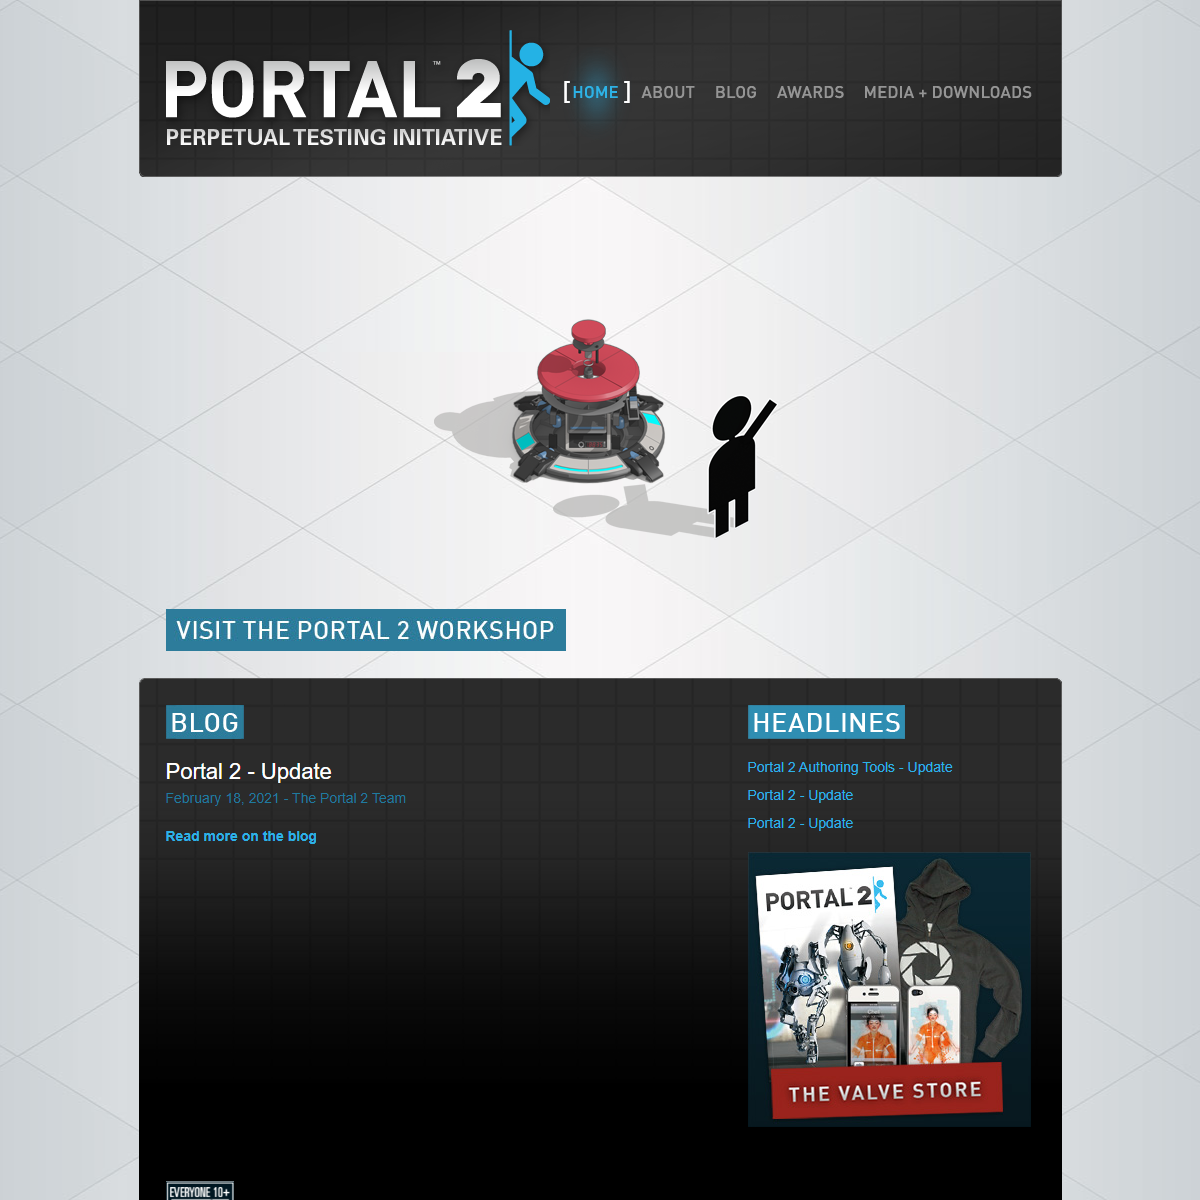 A complete backup of http://www.thinkwithportals.com/